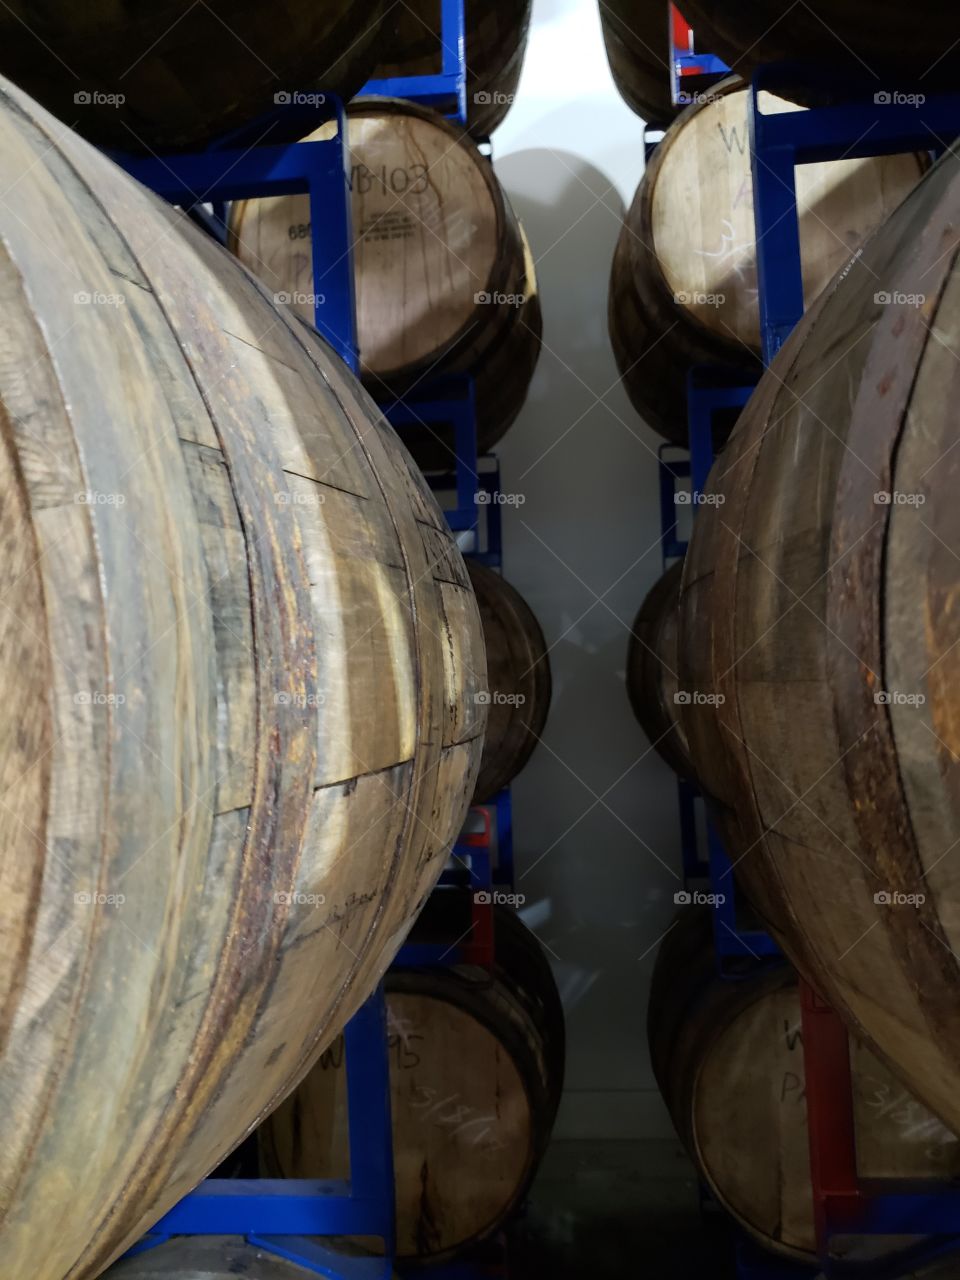 Racks on racks of different types of wooden kegs lined up, dated, and waiting to have the beer tapped and enjoyed